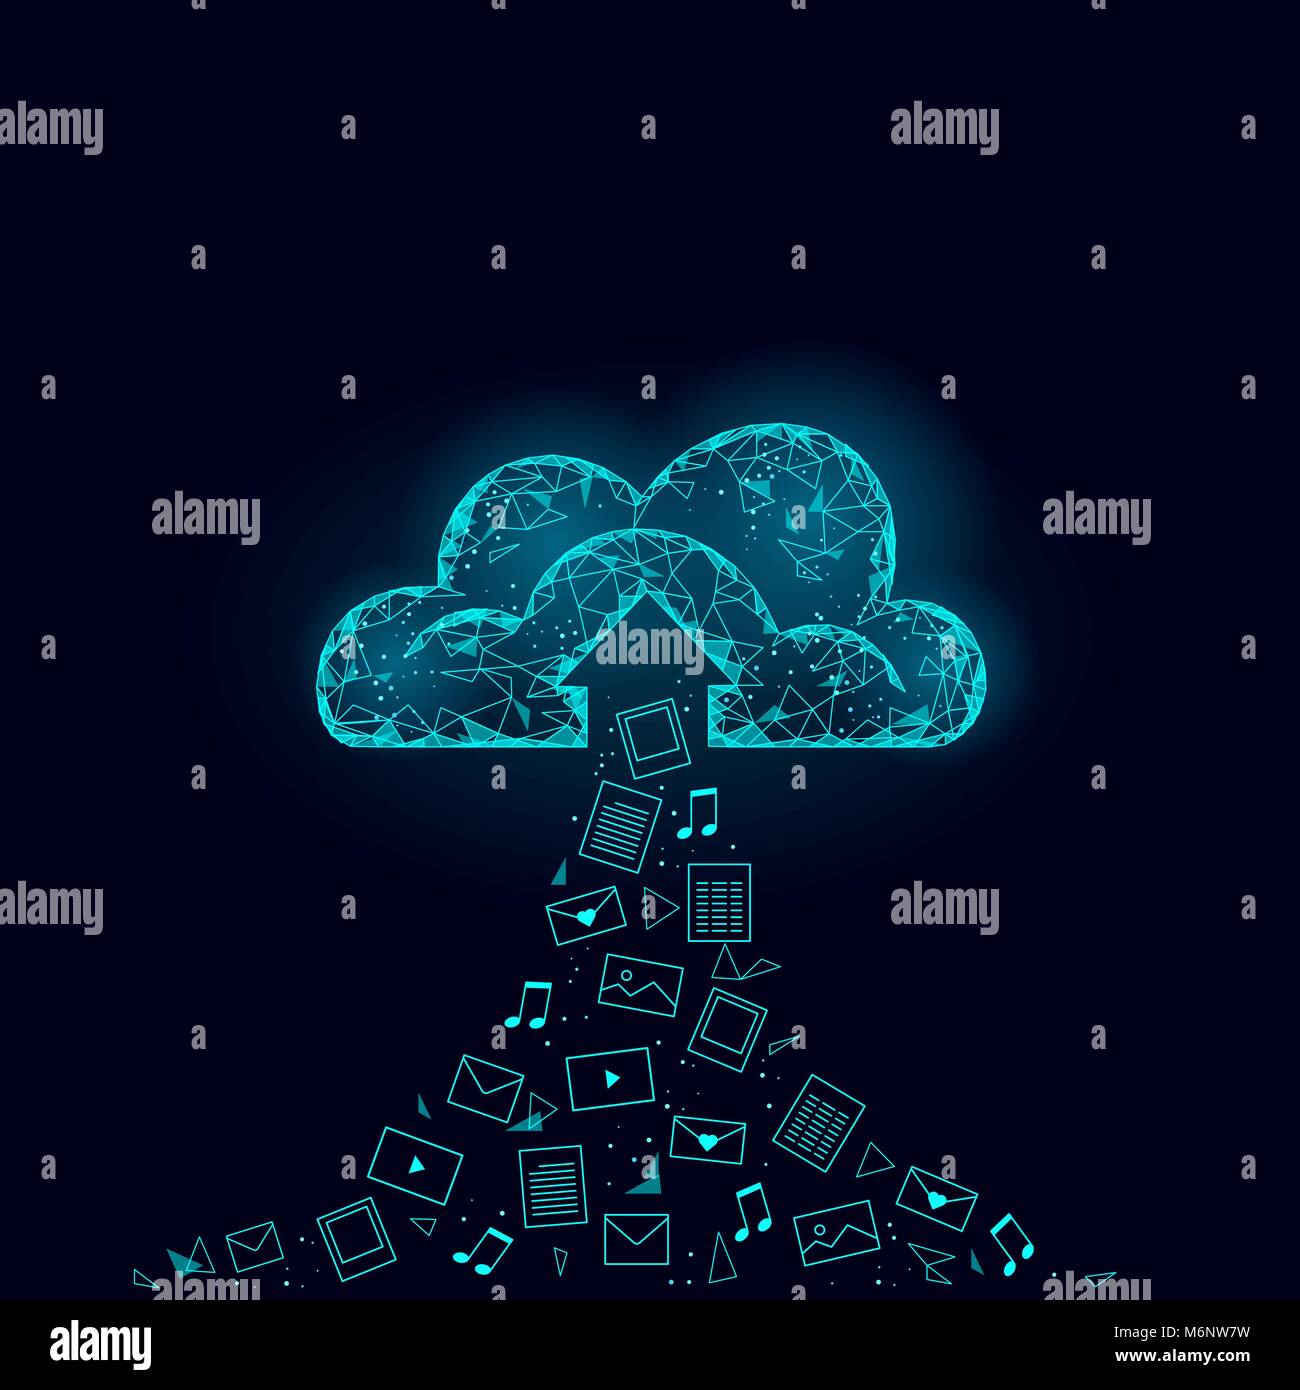 Cloud computing online storage low poly. Polygonal future modern internet business technology. Blue glowing global data information exchange folder file icon Stock Vector